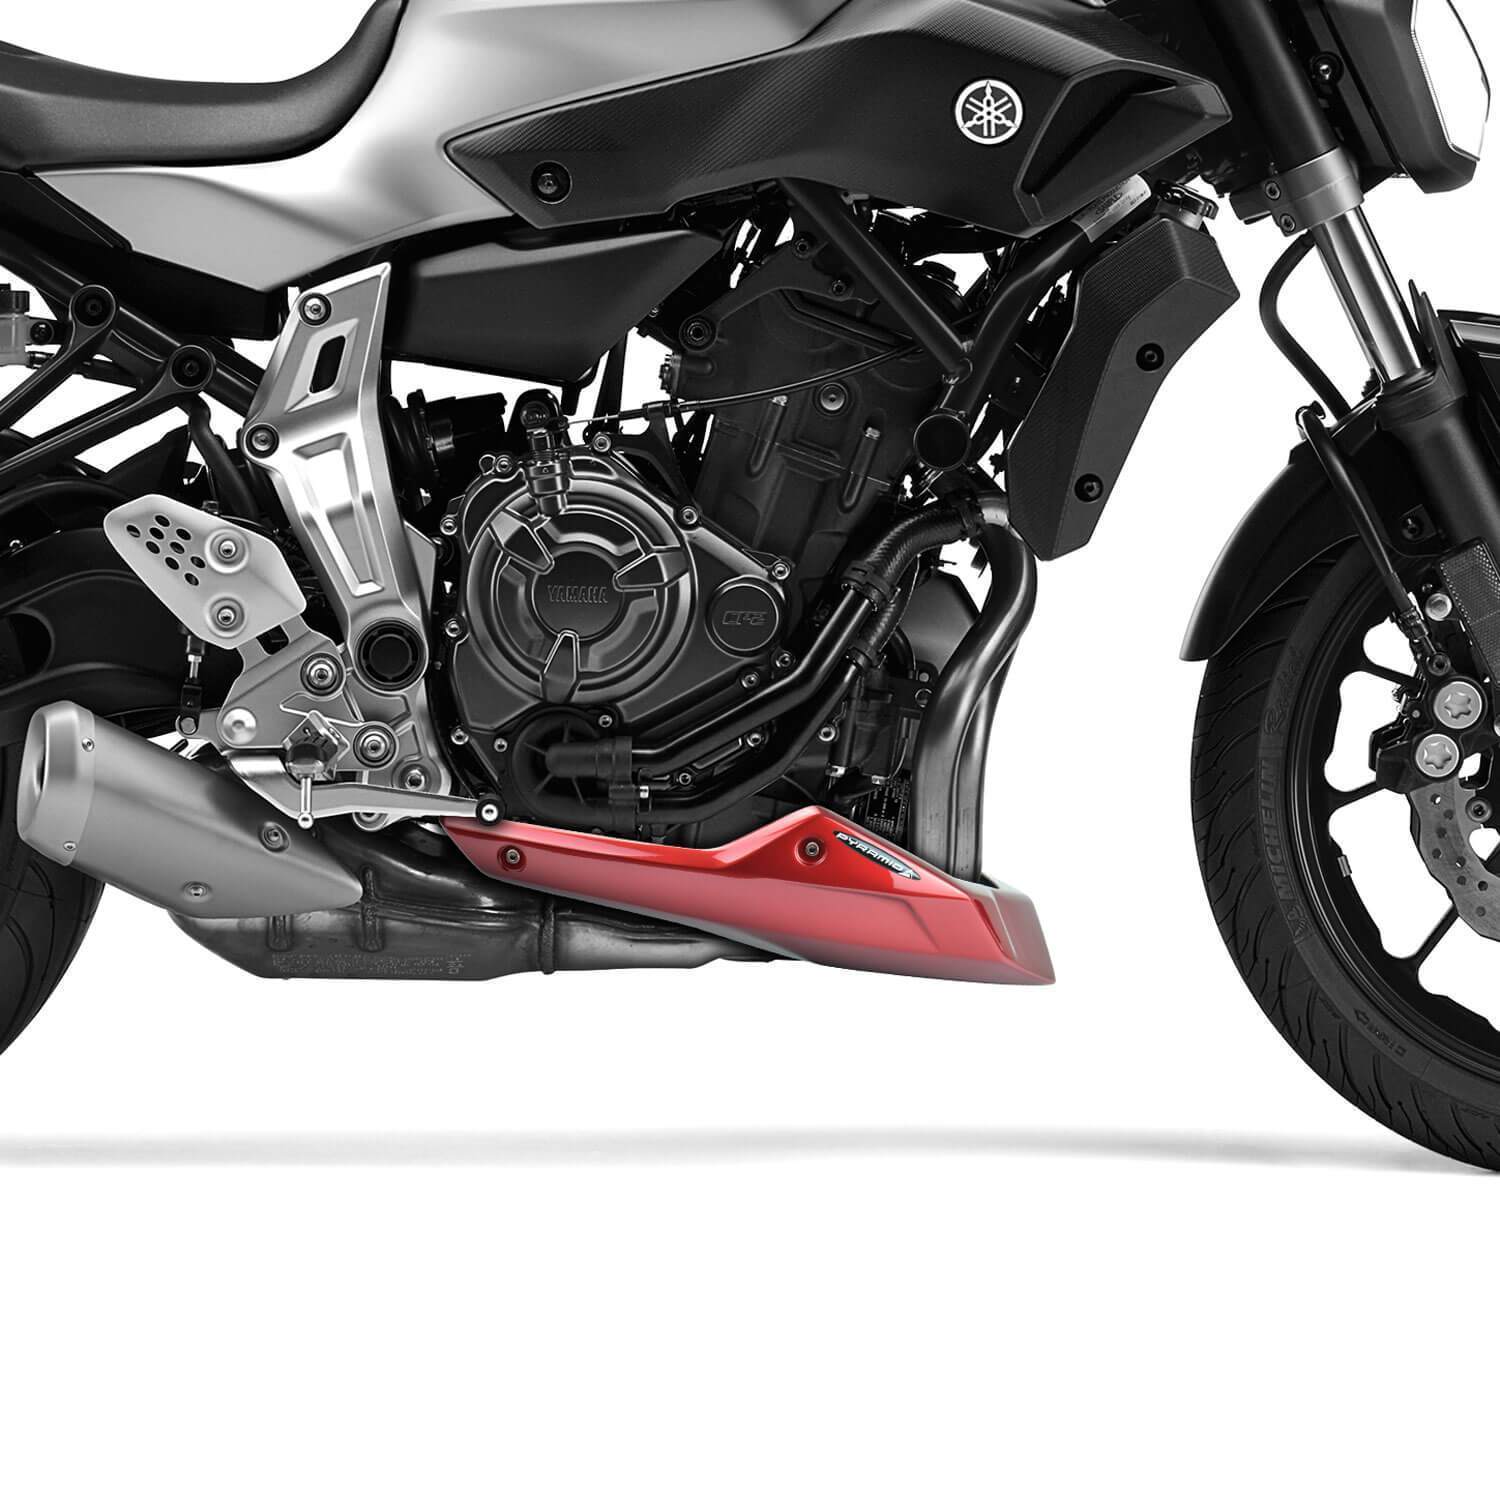 Pyramid Belly Pan | Metallic Red (Radical Red) | Yamaha MT-07 2013>Current-22136R-Belly Pans-Pyramid Motorcycle Accessories